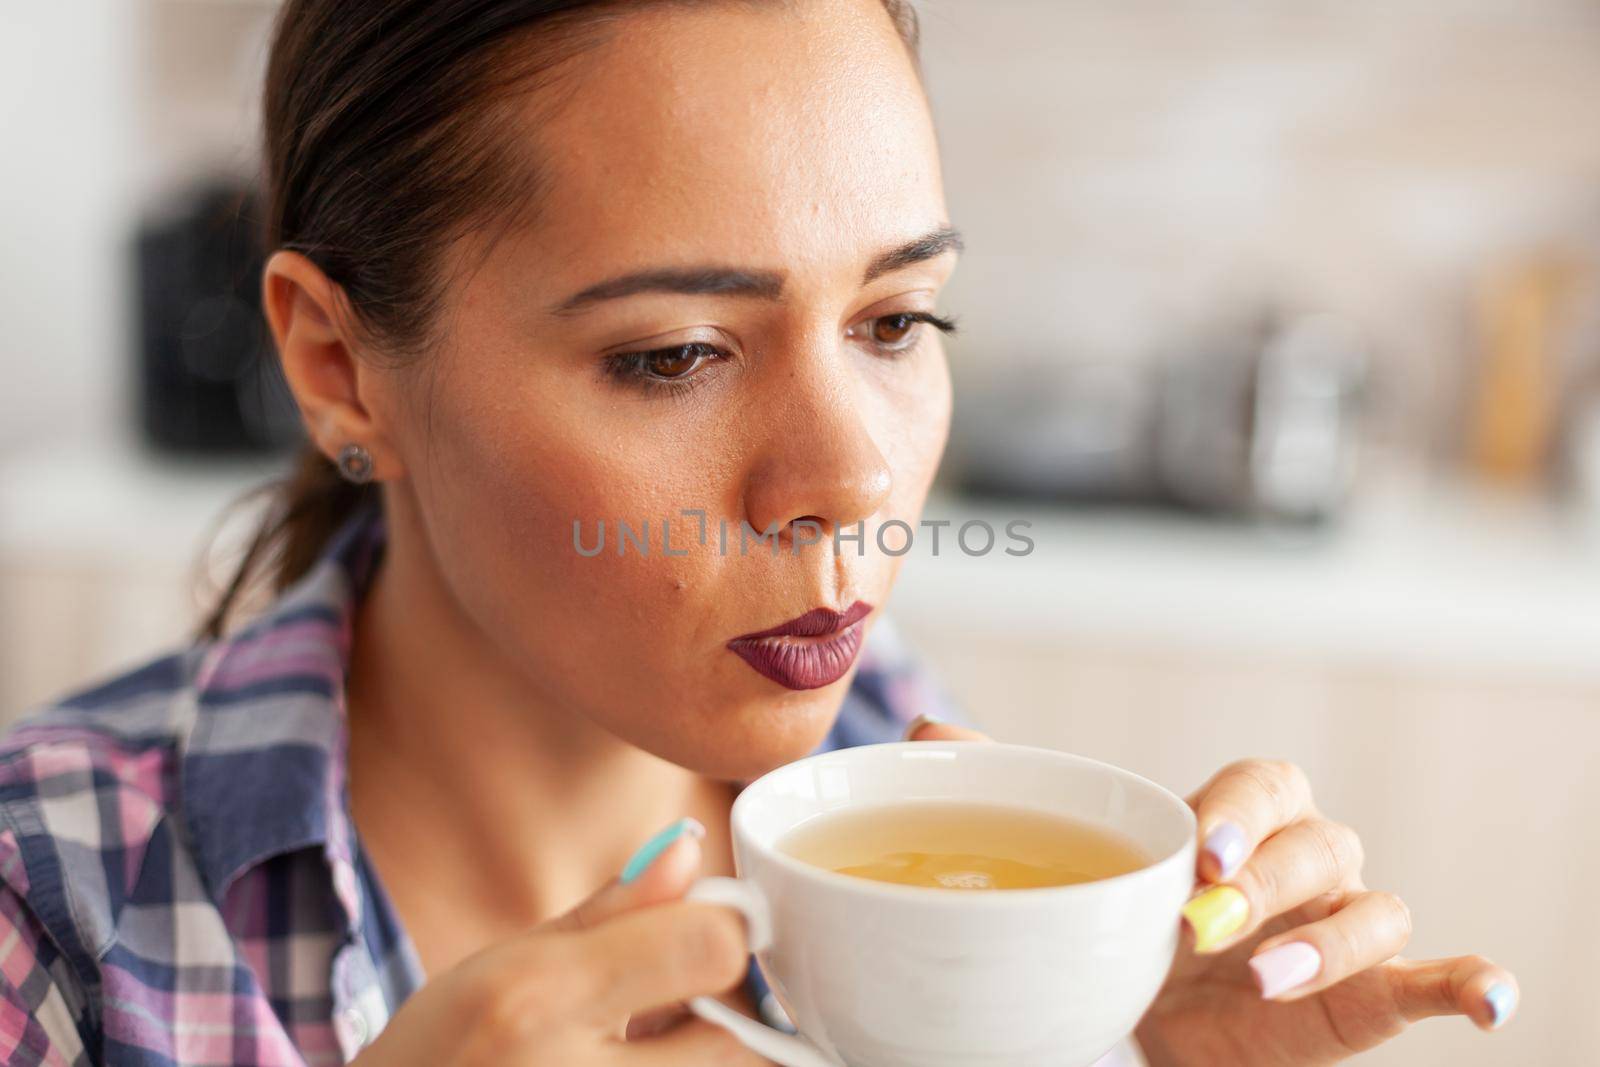 Close up of woman in kitchen trying to drink hot green tea with aromatic herbs. Pretty lady sitting in the kitchen in the morning during breakfast time relaxing with tasty natural herbal tea.